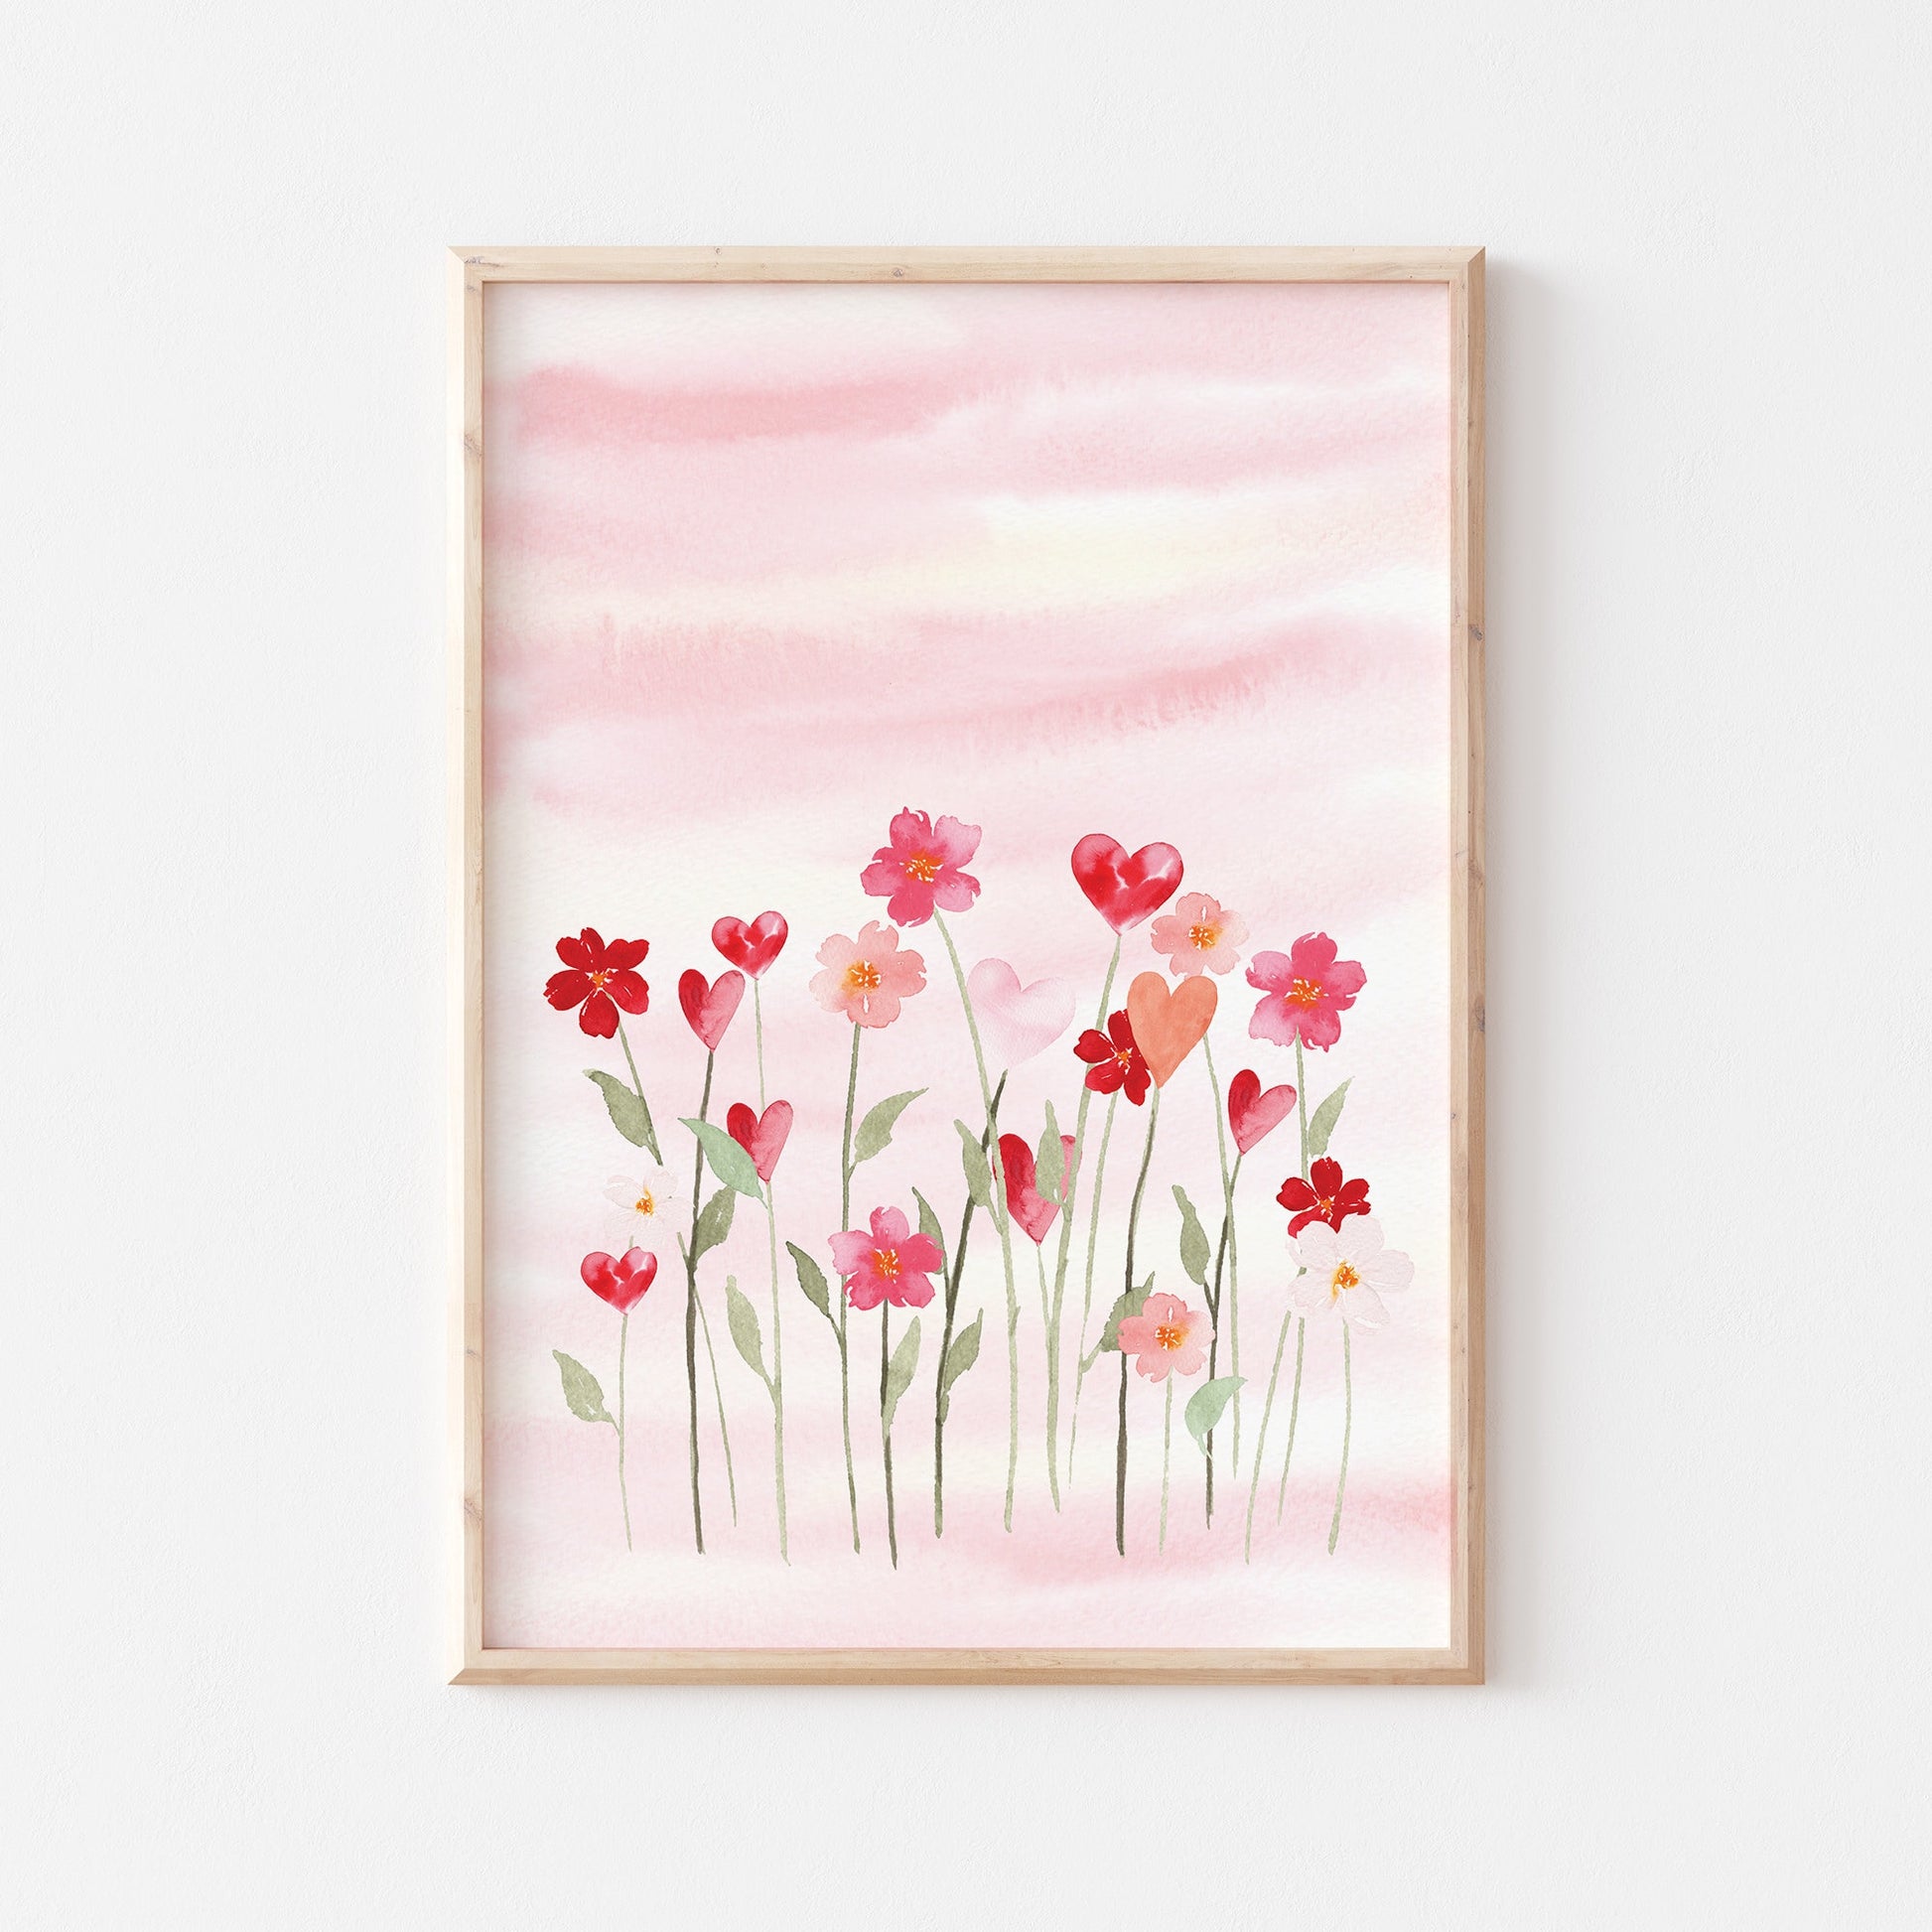 Watercolor Heart and Flowers Print, Valentines Day Art, Watercolor Pink Flower Watercolour Painting, Pink wall art, Instant Download